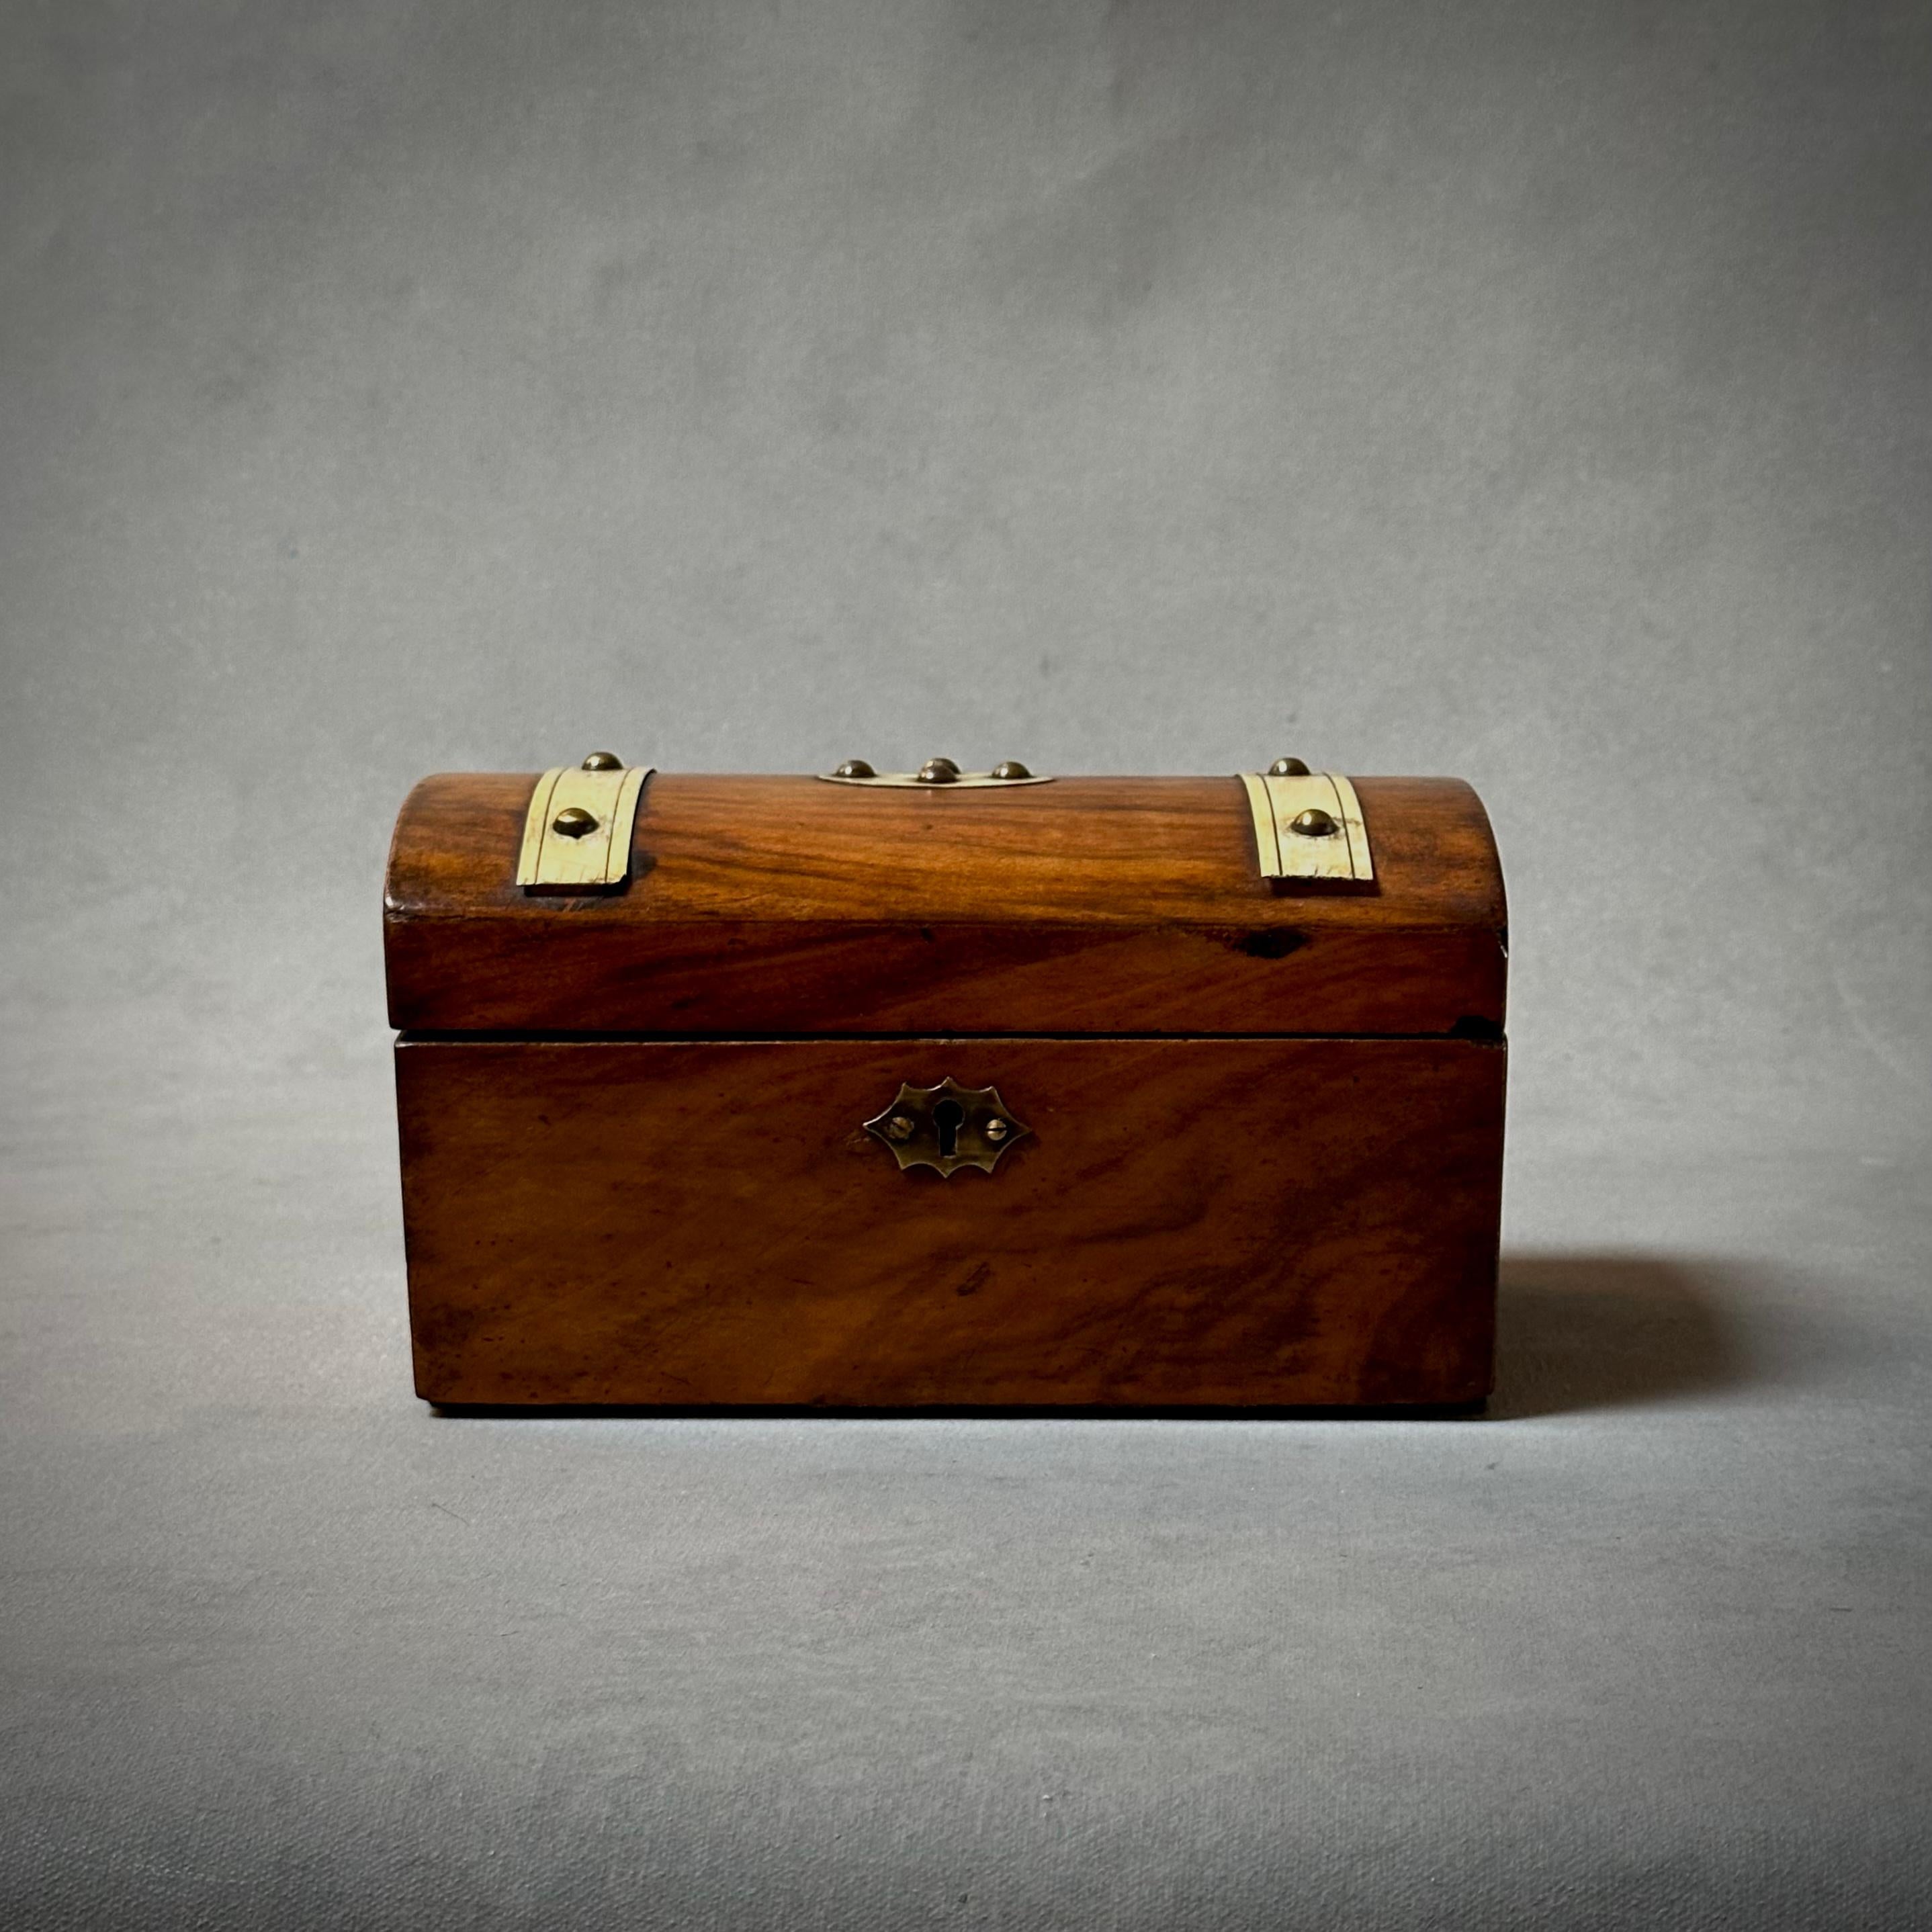 Late 19th century English walnut tea caddy box with studded ivory leather decorative banding. Traditional with utilitarian sensibility, the piece's unique detailing evoke a steam trunk. Great for adding an element of textural interest to any